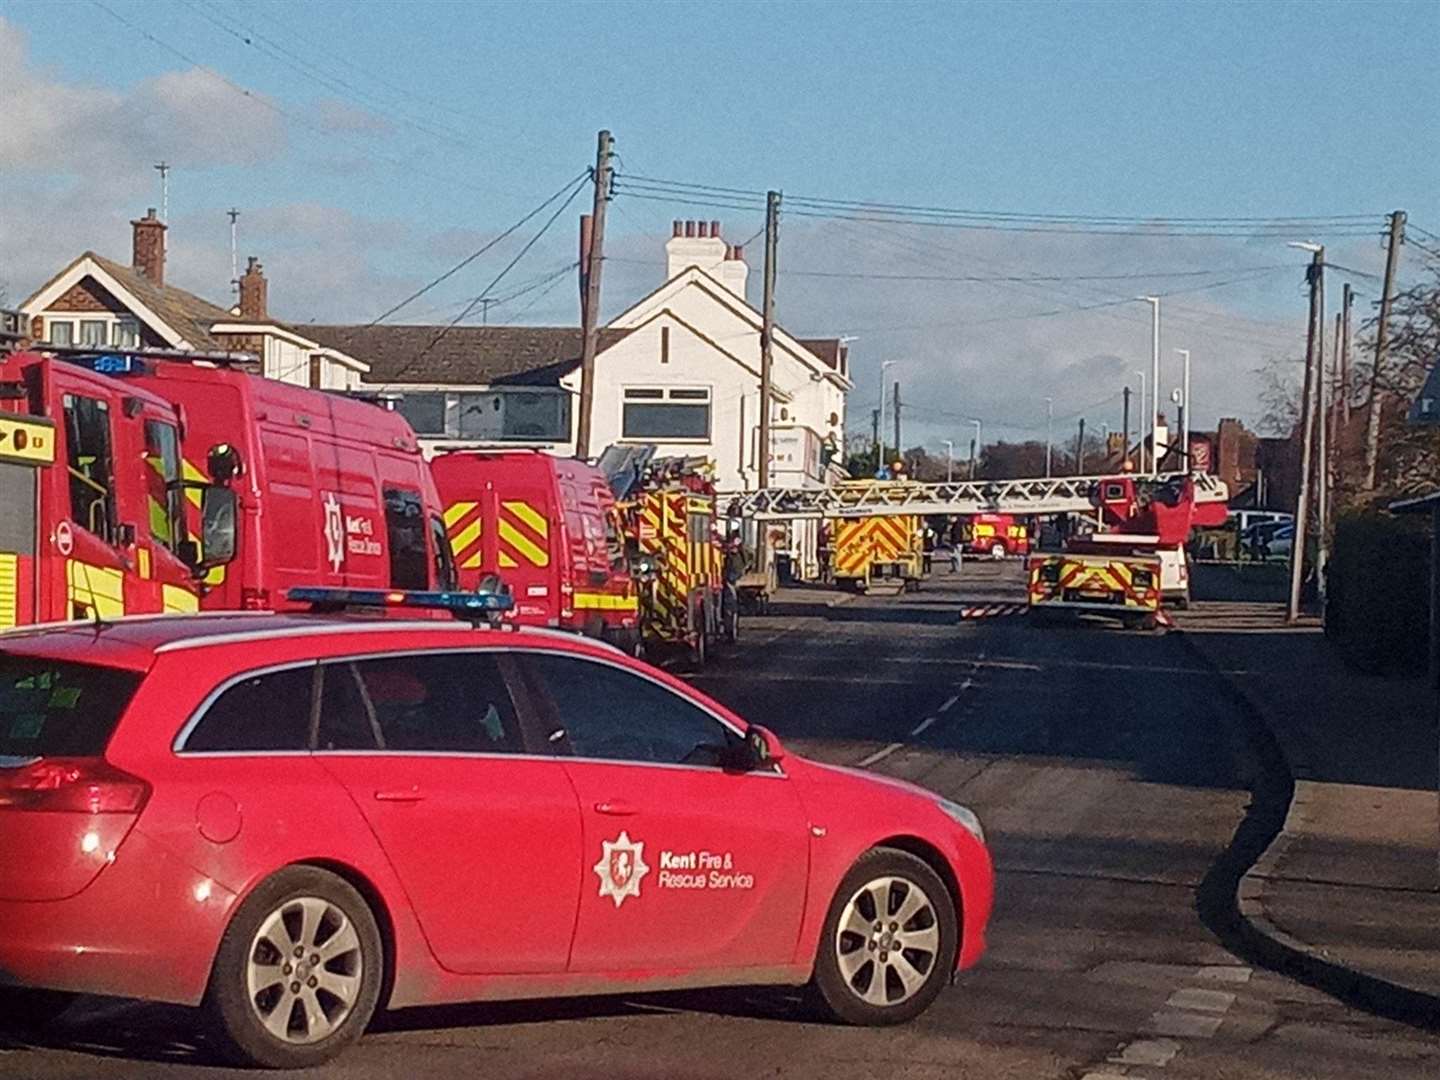 Minster Road on the Isle of Sheppey was closed while a turntable ladder from Kent Fire and Rescue was used during a medical incident. Picture: Steve Harding